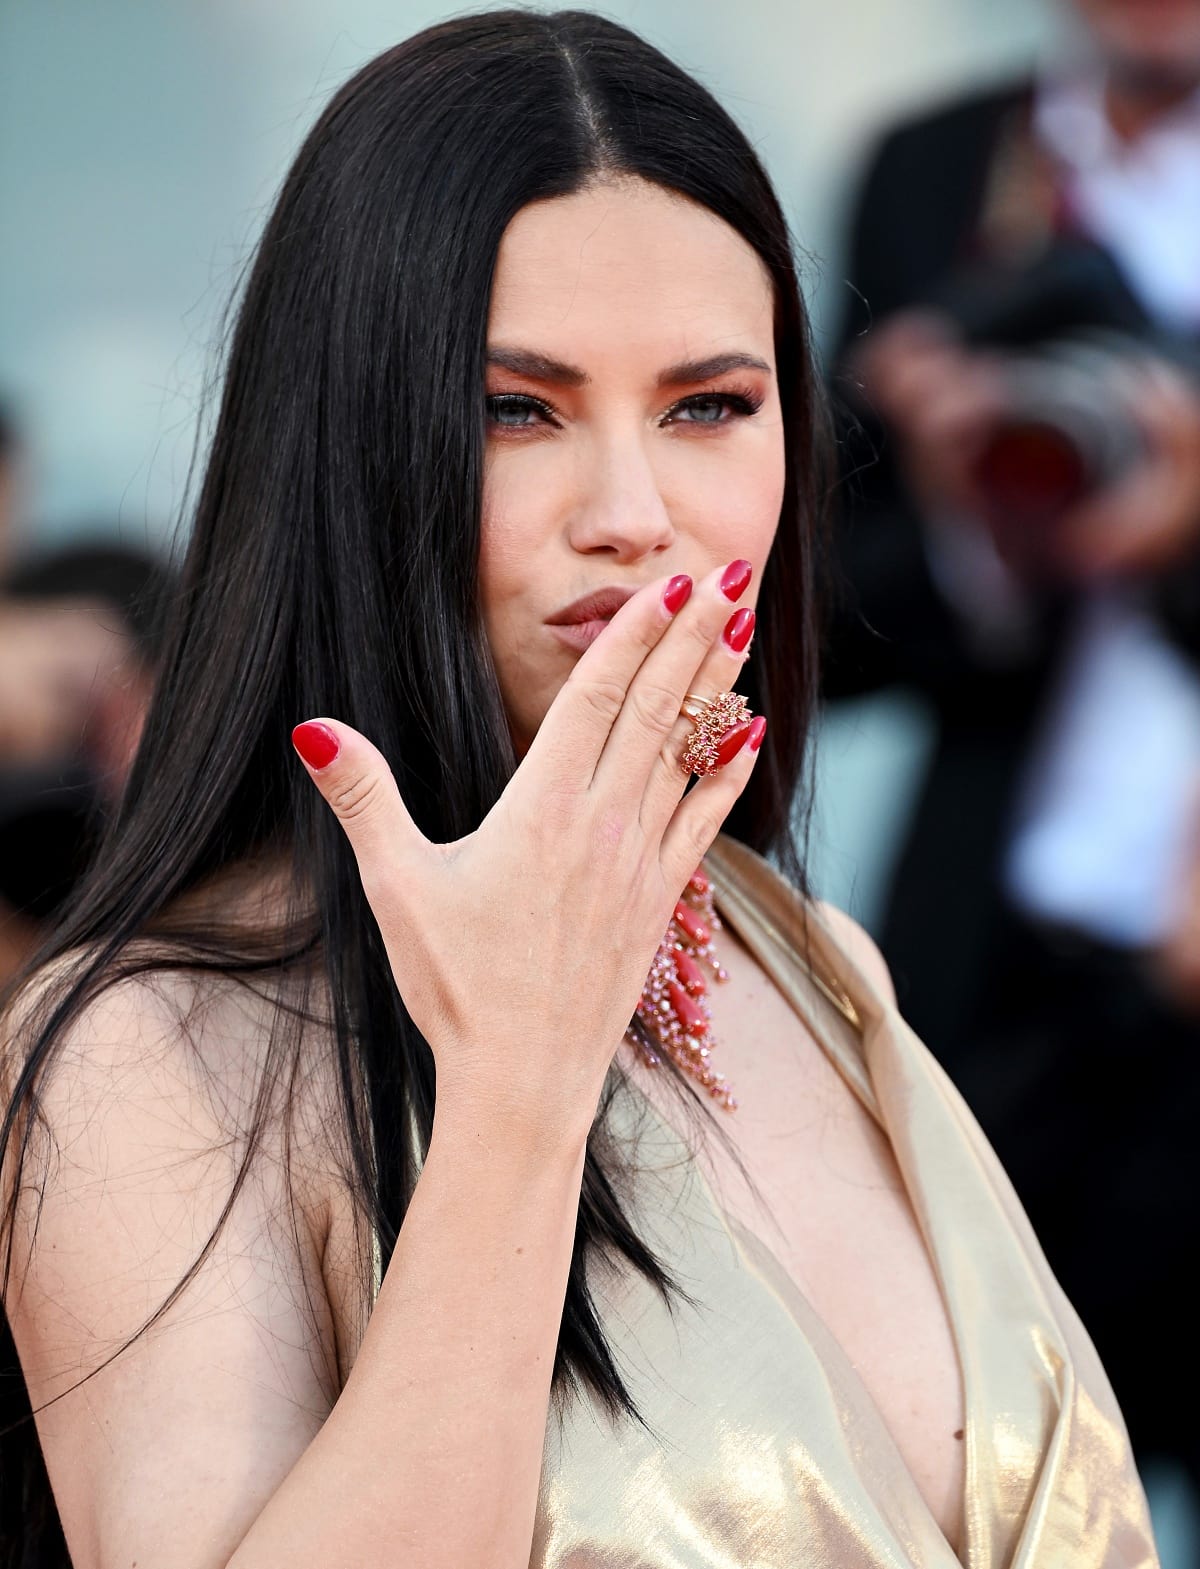 Adriana Lima showing off her large red ring, which matched her eye-catching diamond necklace and sultry red nails